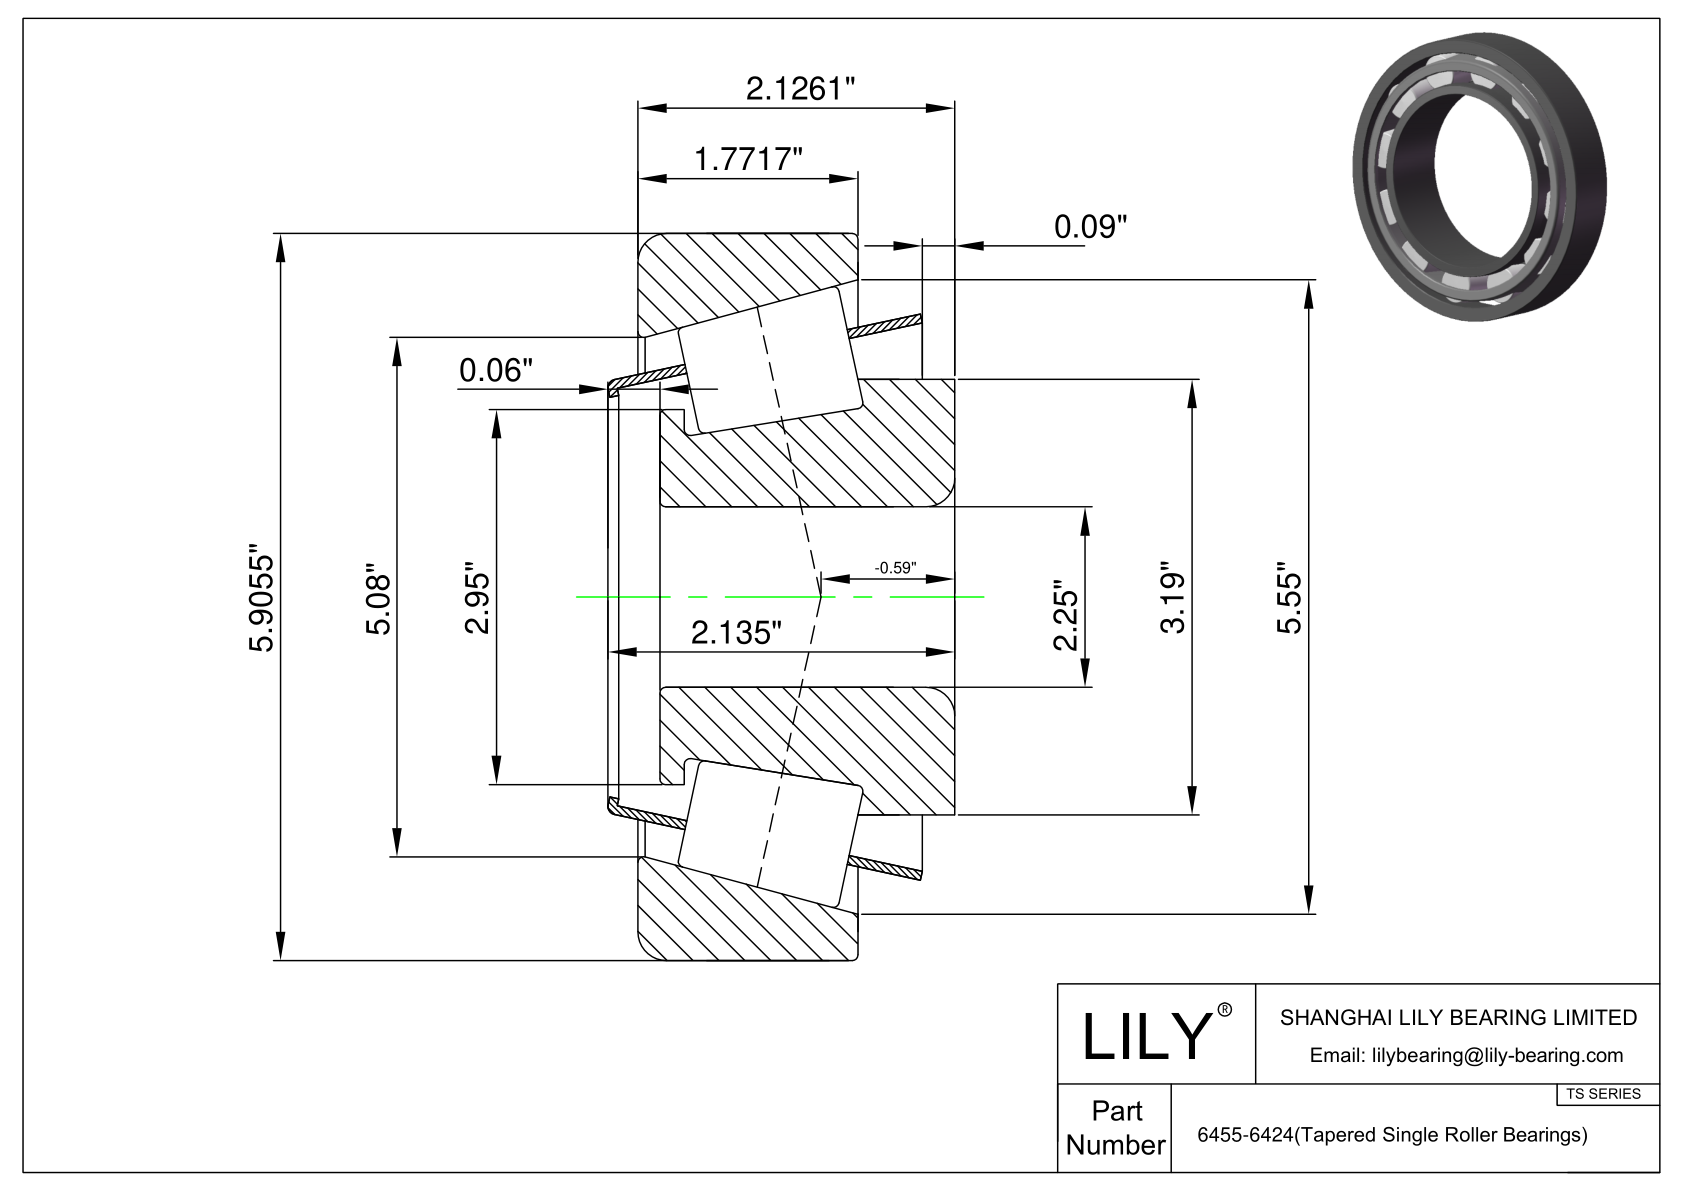 6455-6424 TS (Tapered Single Roller Bearings) (Imperial) cad drawing